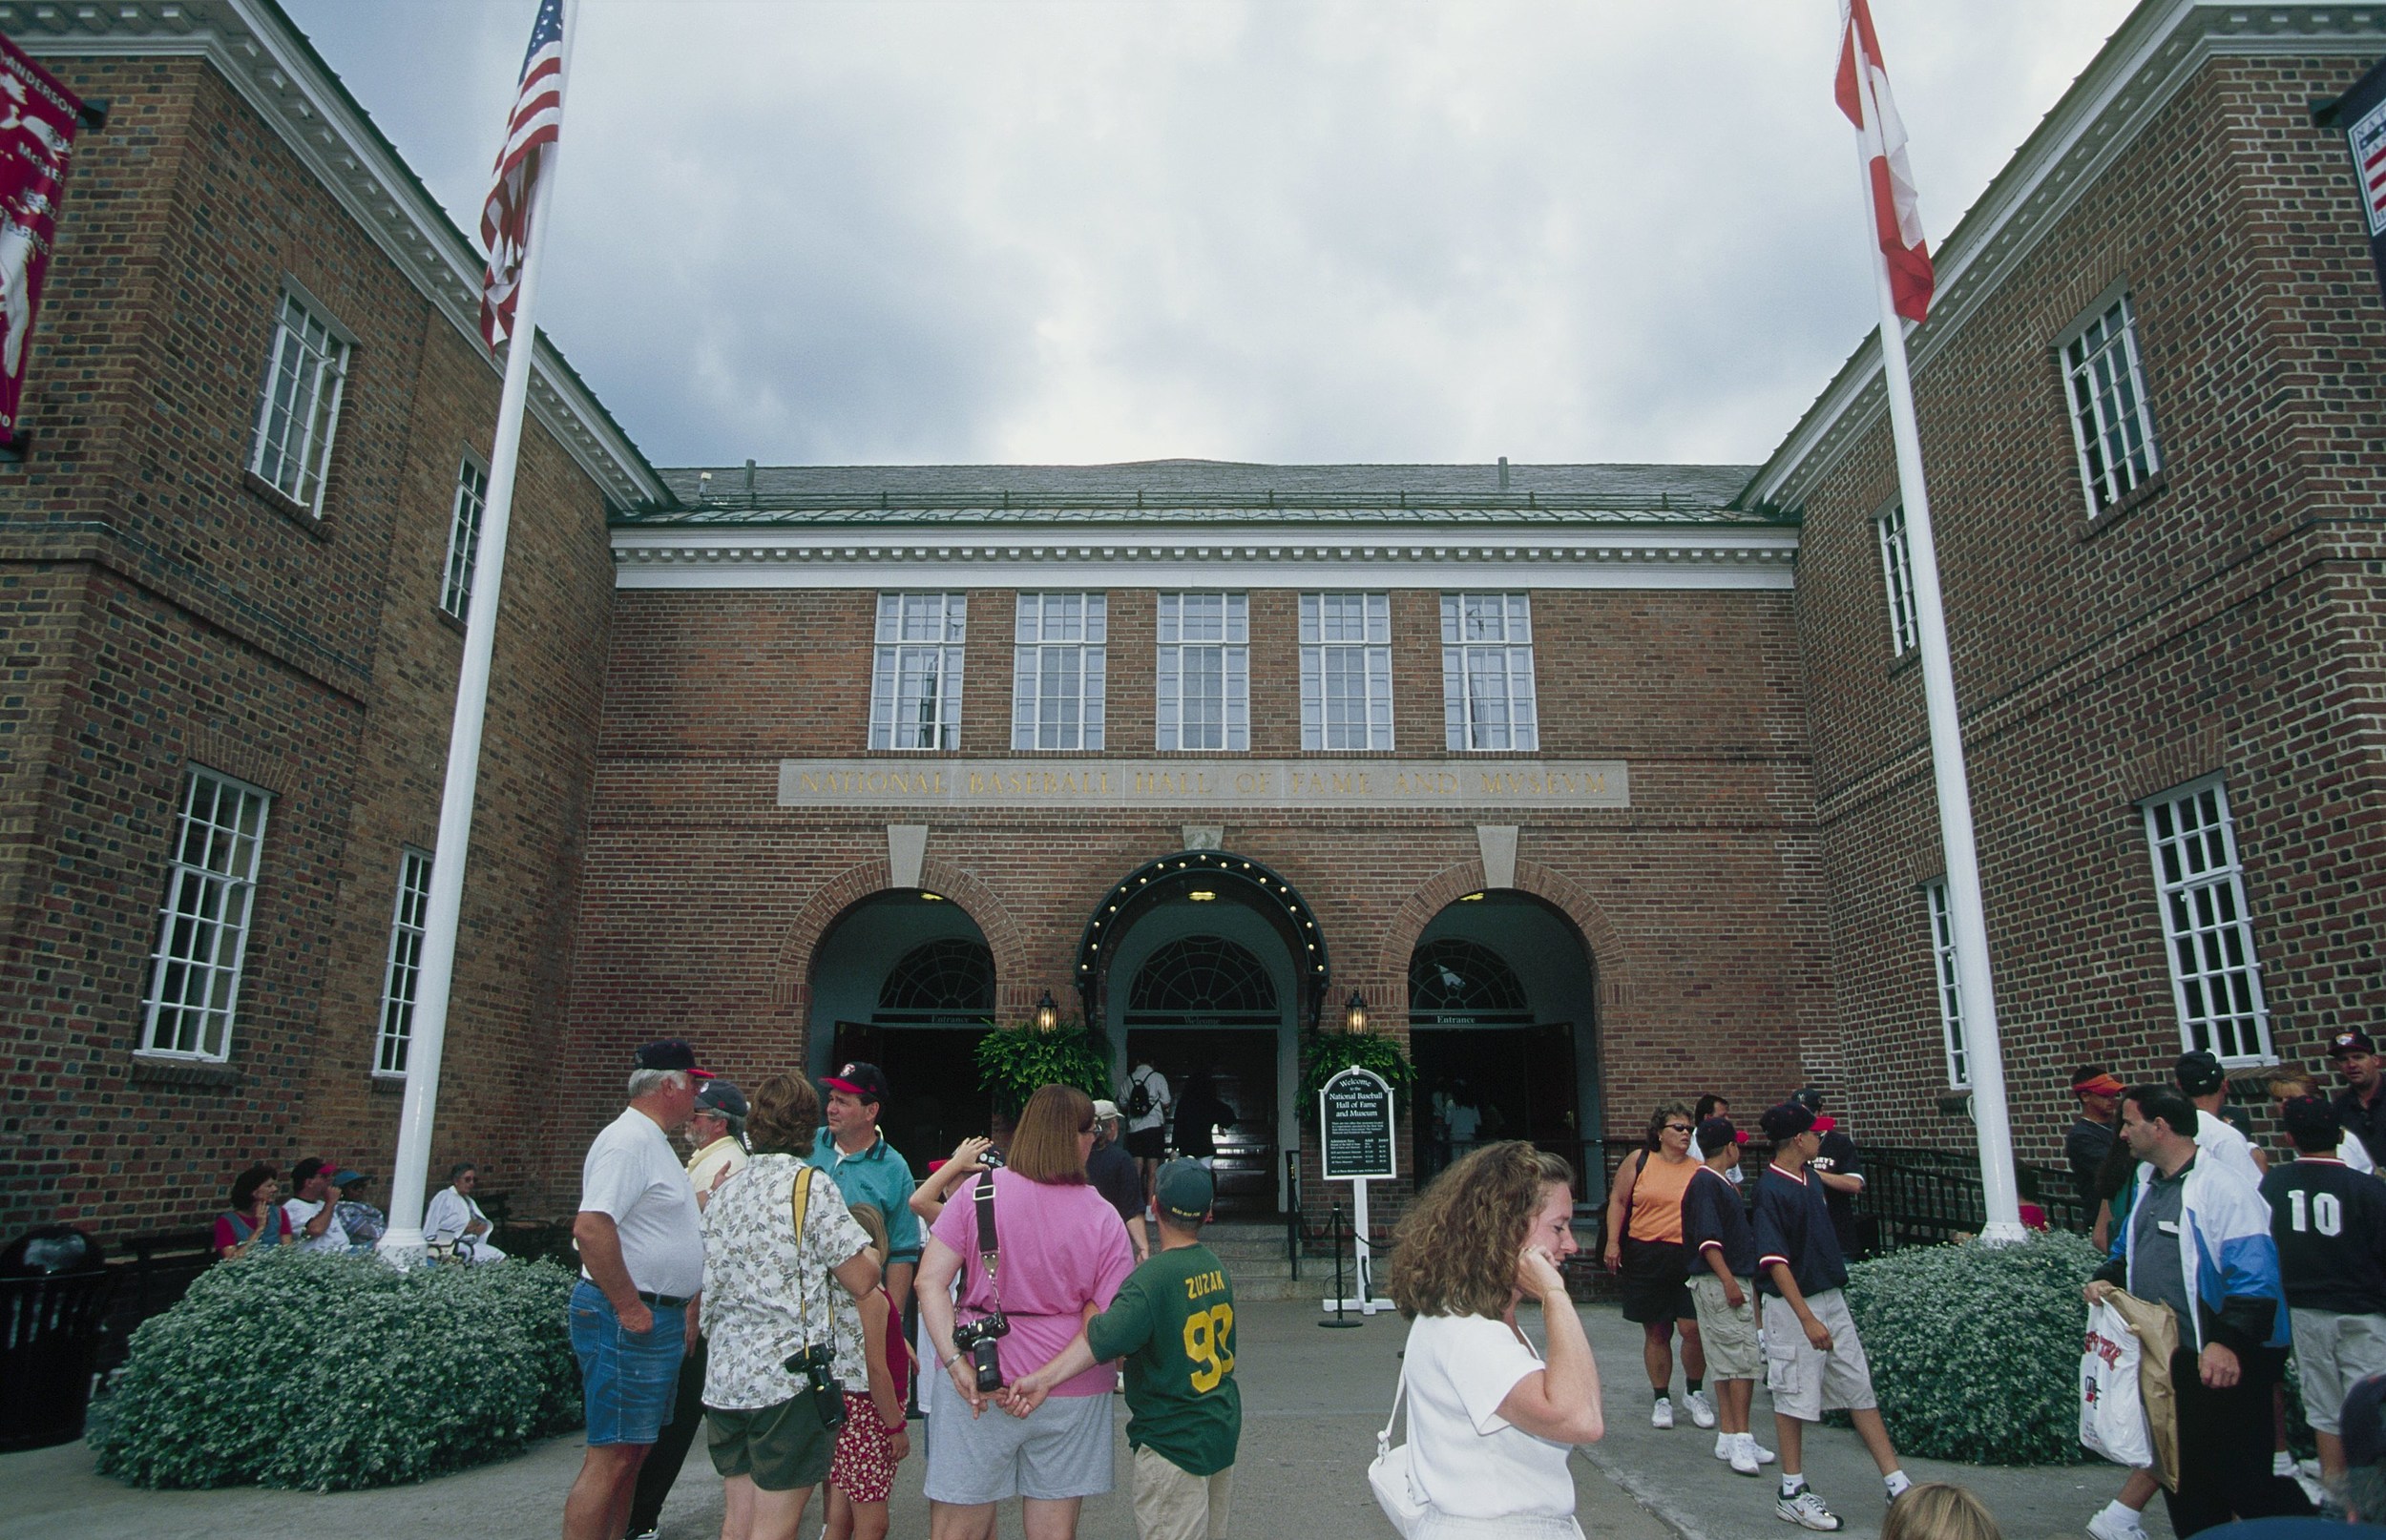 National Baseball Hall of Fame Museum at Cooperstown New York